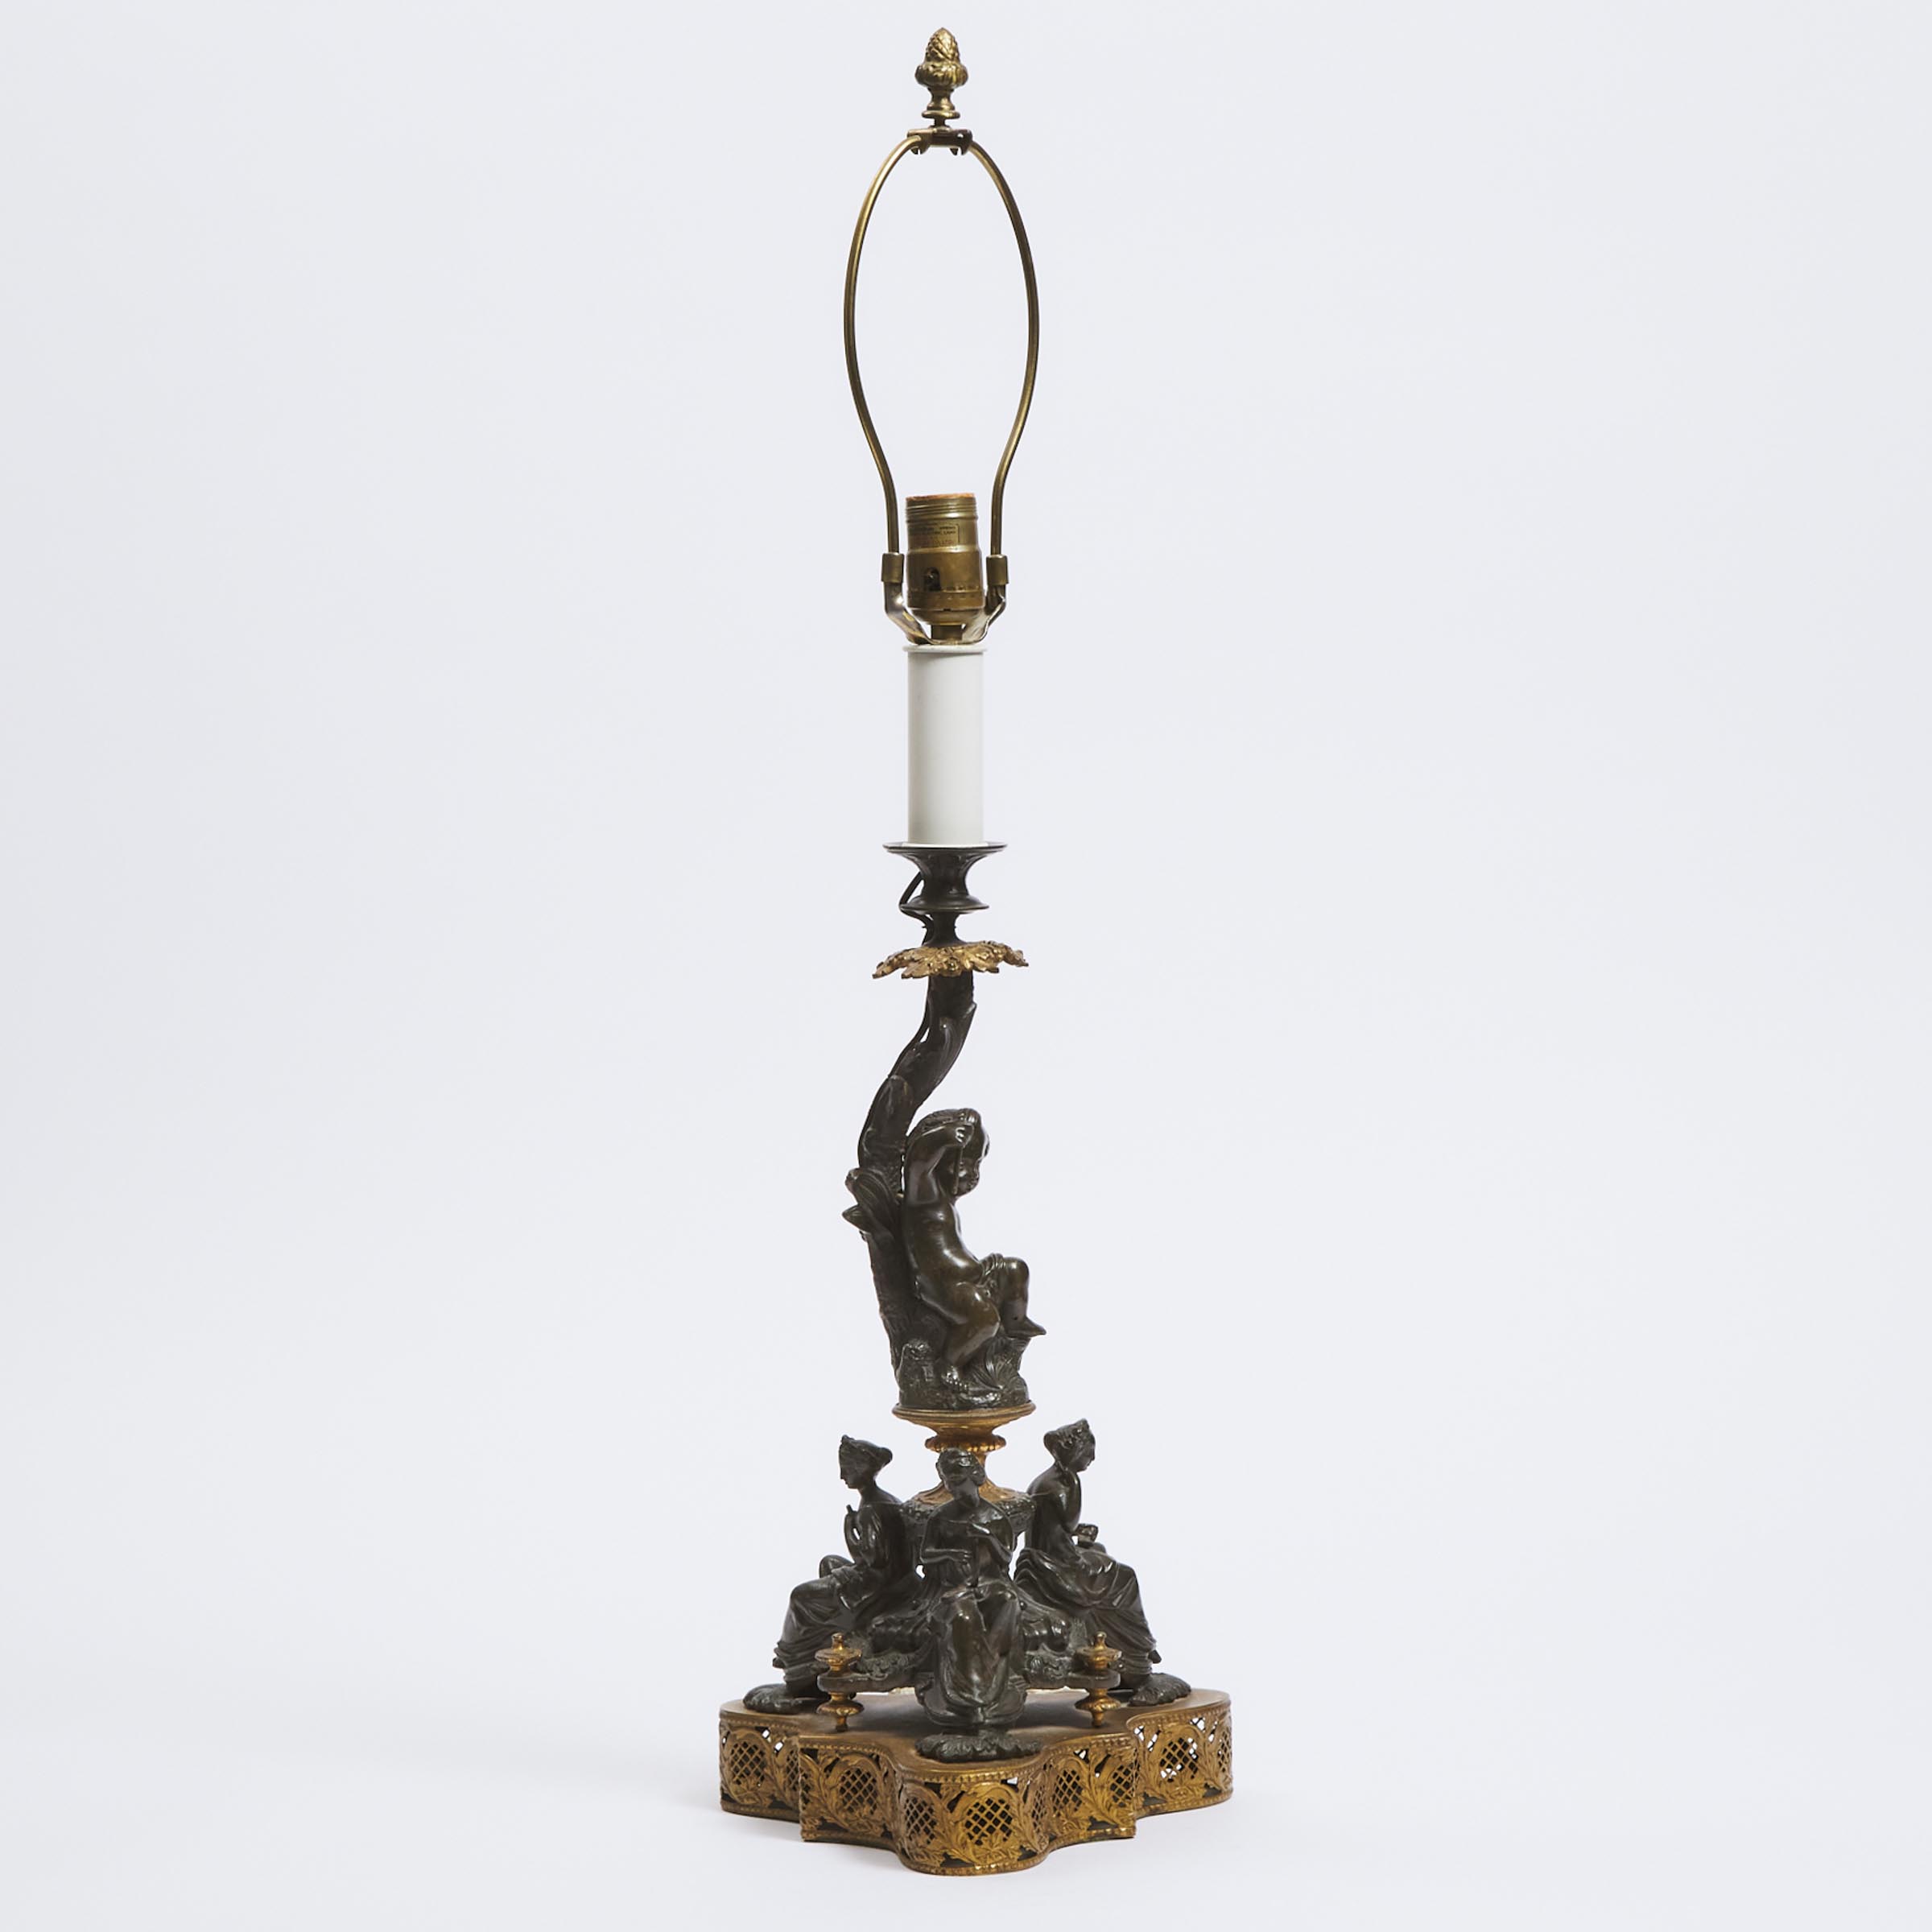 Neoclassical Gilt and Bronze Patinated Metal Table Lamp, early/mid 20th century